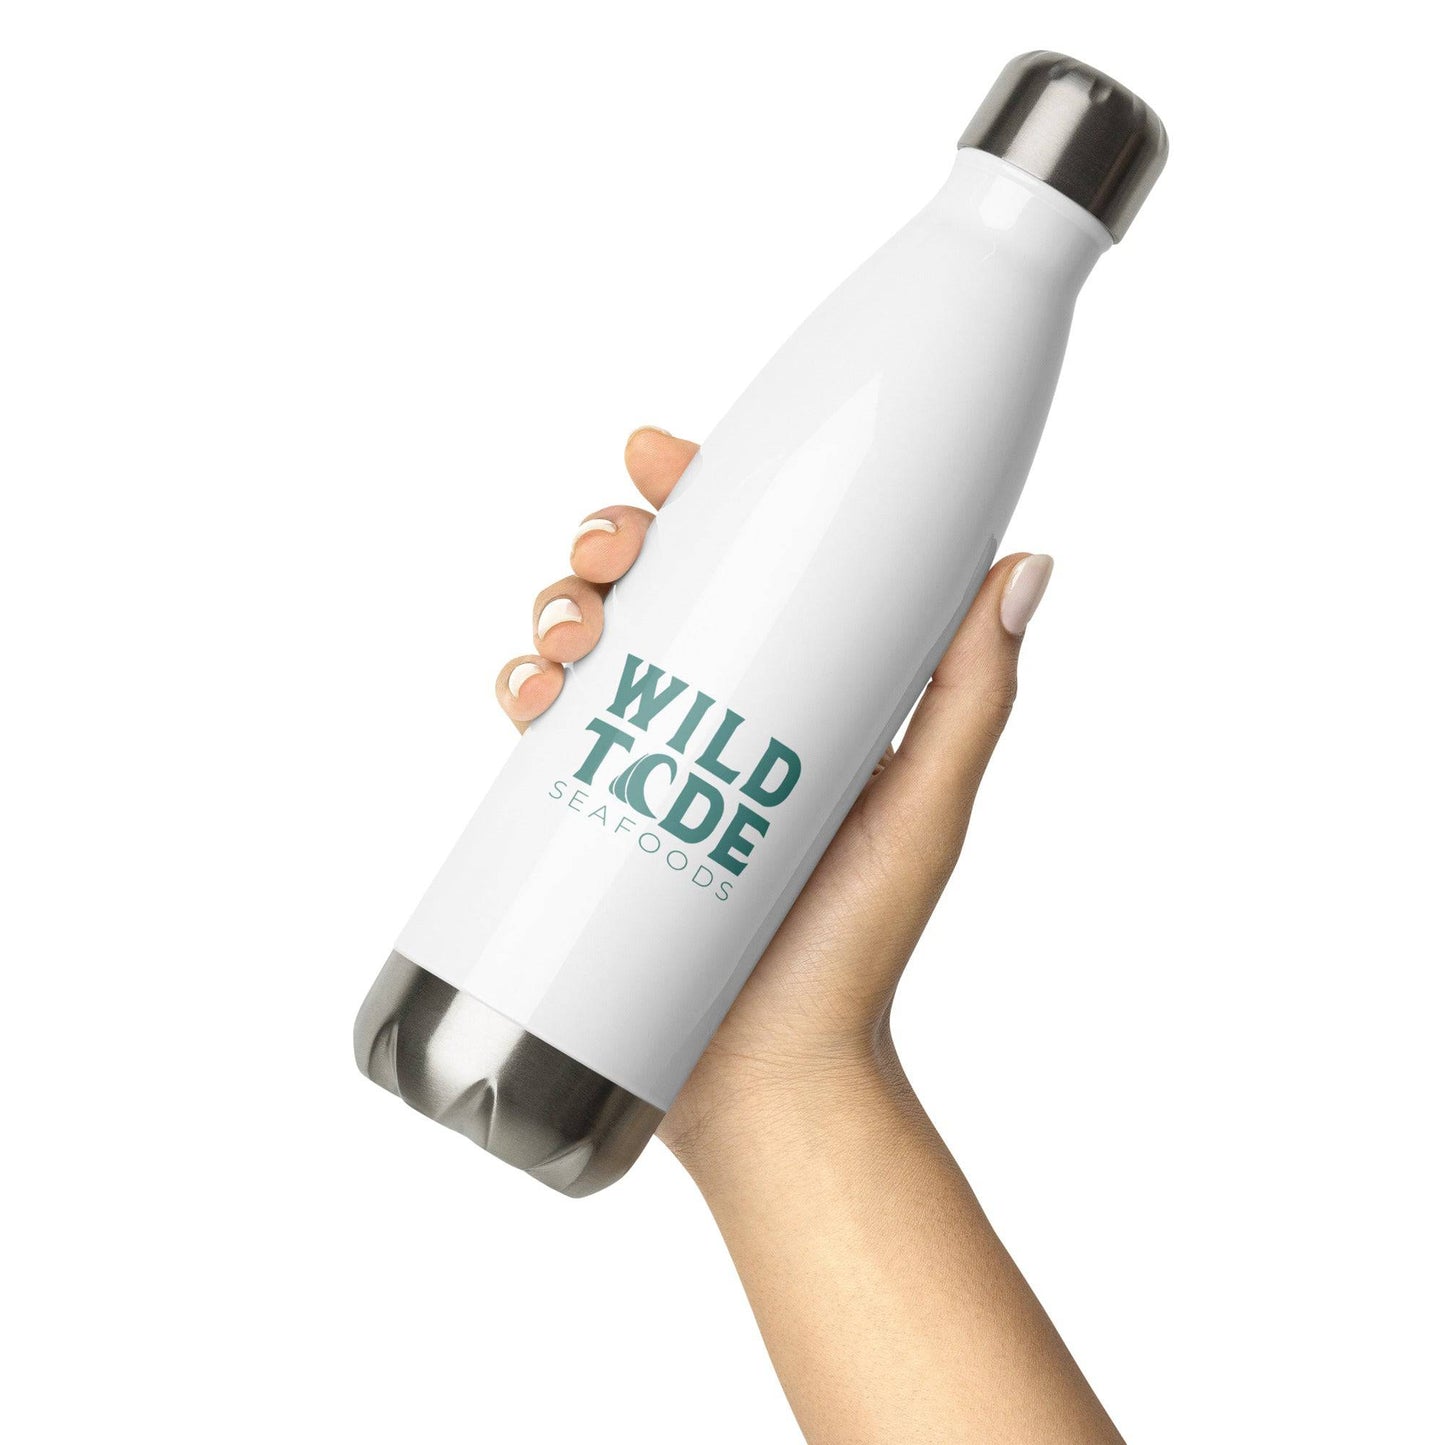 Wild Tide Seafoods Stainless Steel Water Bottle - Wild Tide Seafoods